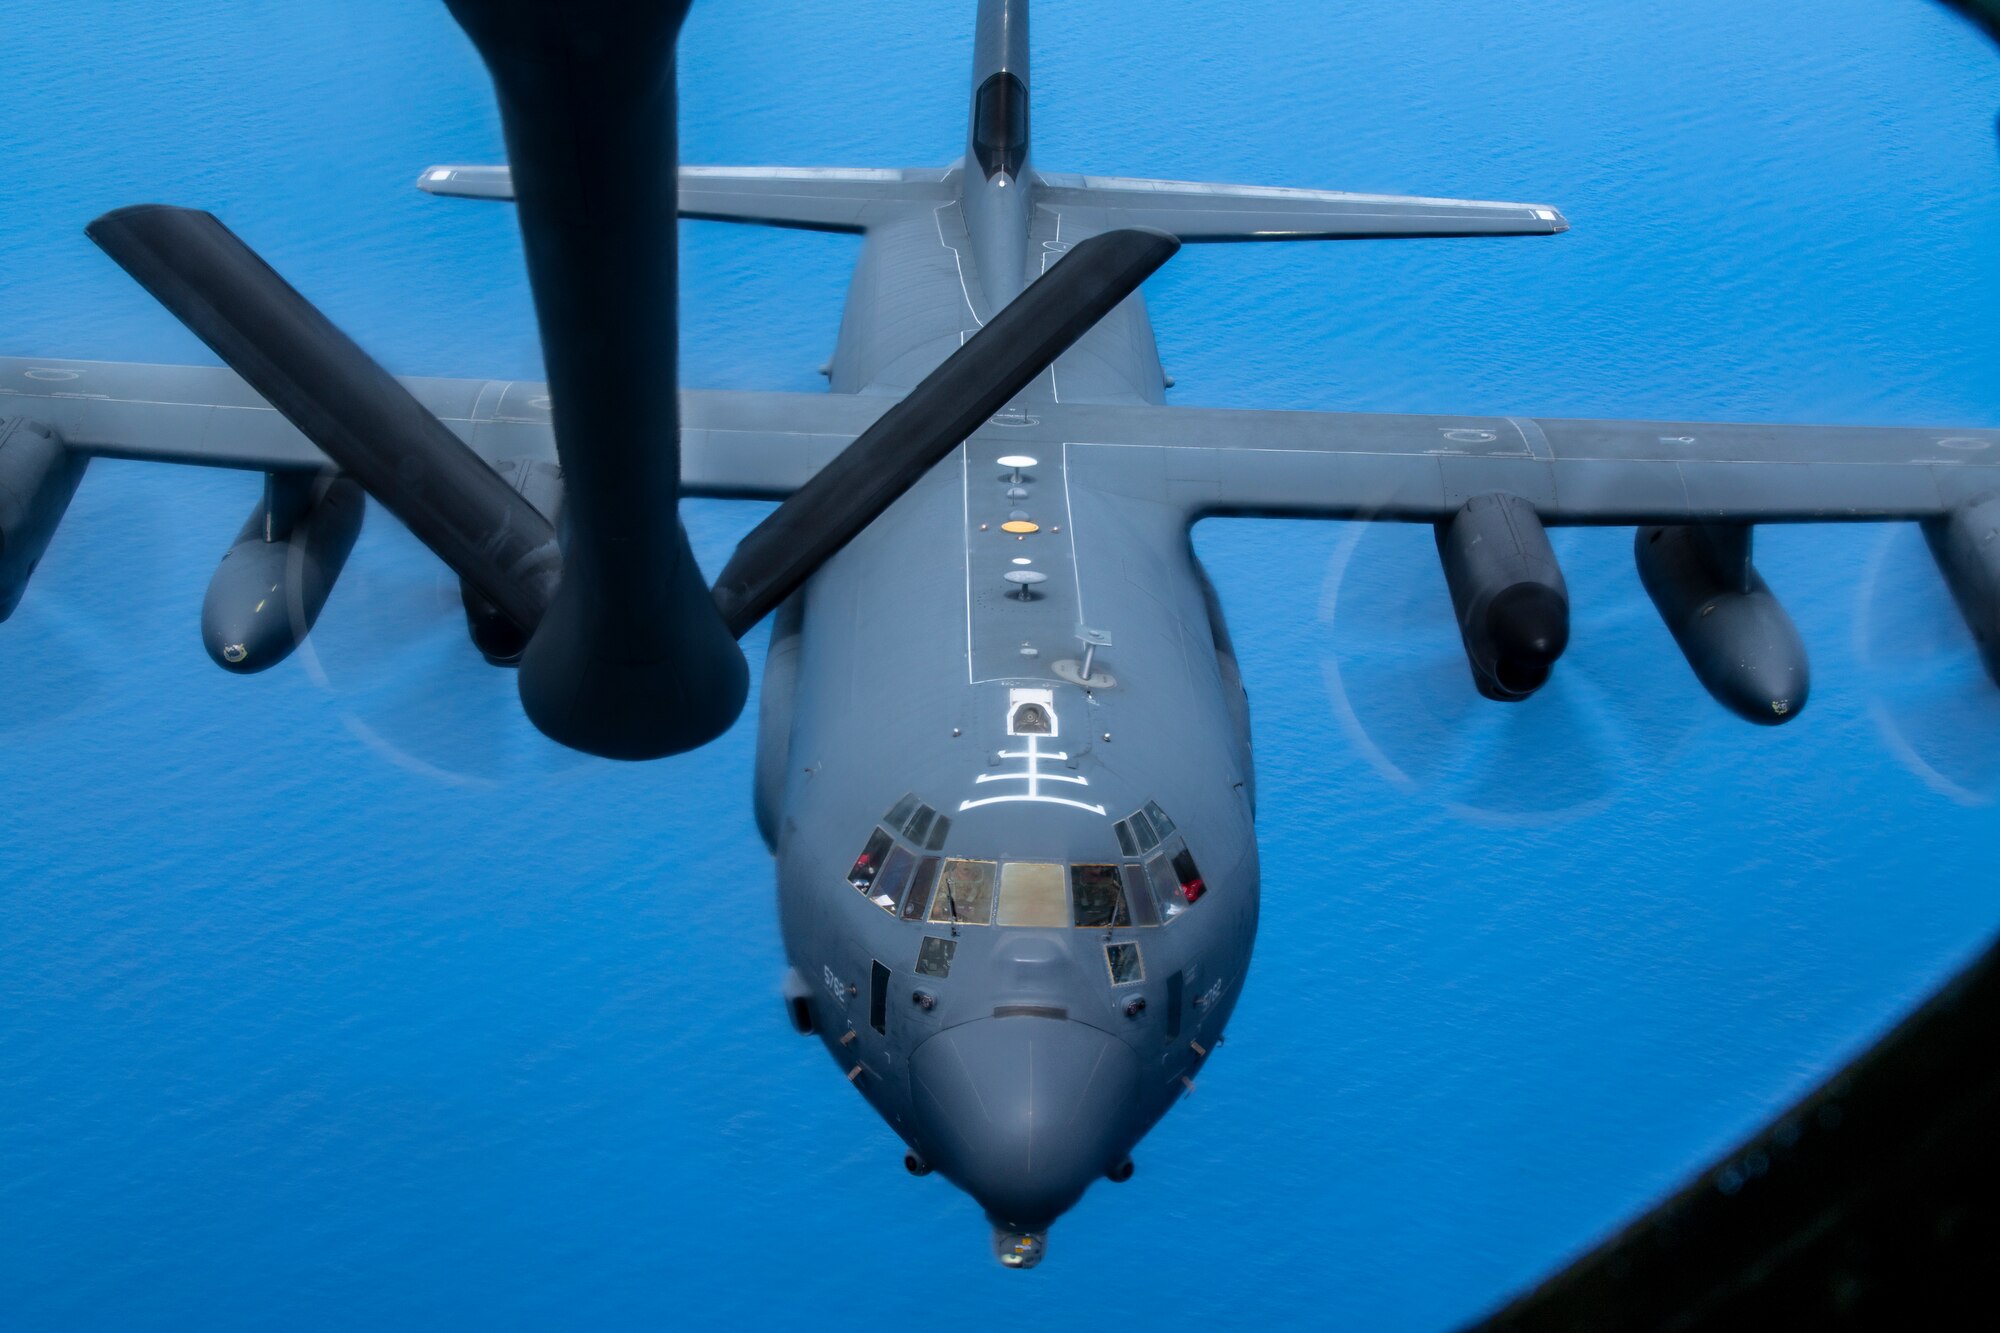 A U.S. Air Force MC-130J Commando II aircraft assigned to the 1st Special Operations Squadron approaches a KC-135 Stratotanker from the 909th Air Refueling Squadron to receive fuel over the Pacific Ocean, July 19, 2023.